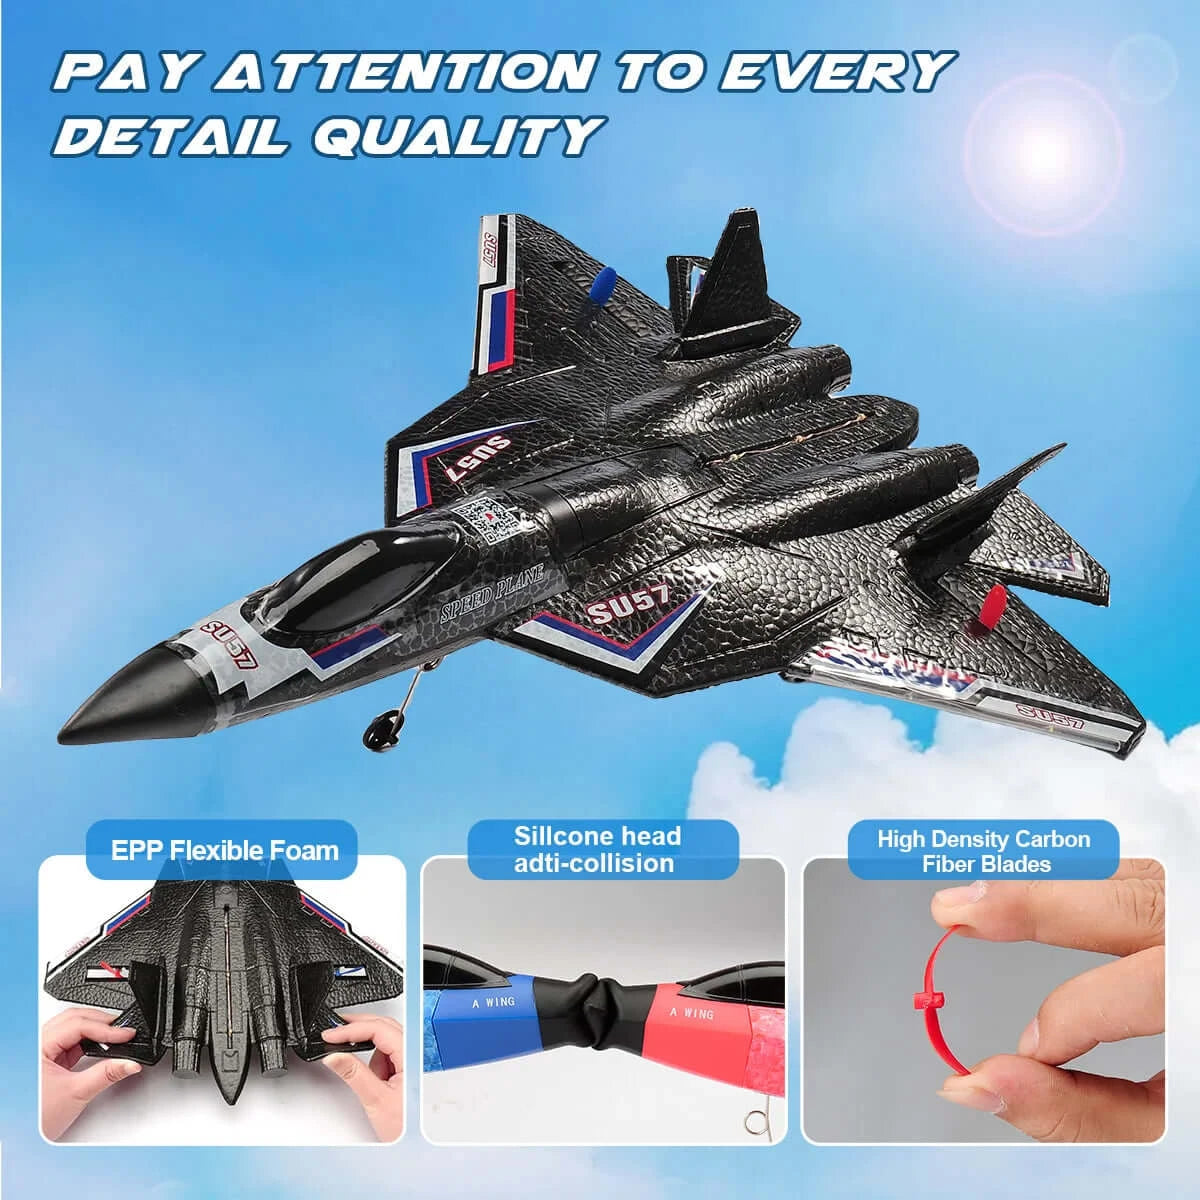 XiaXiu SU57 RC Plane: 2.4G Light-Up Foam Aircraft for Kids - Hand Thrown, Fixed Wing Toy | Kidstoylover